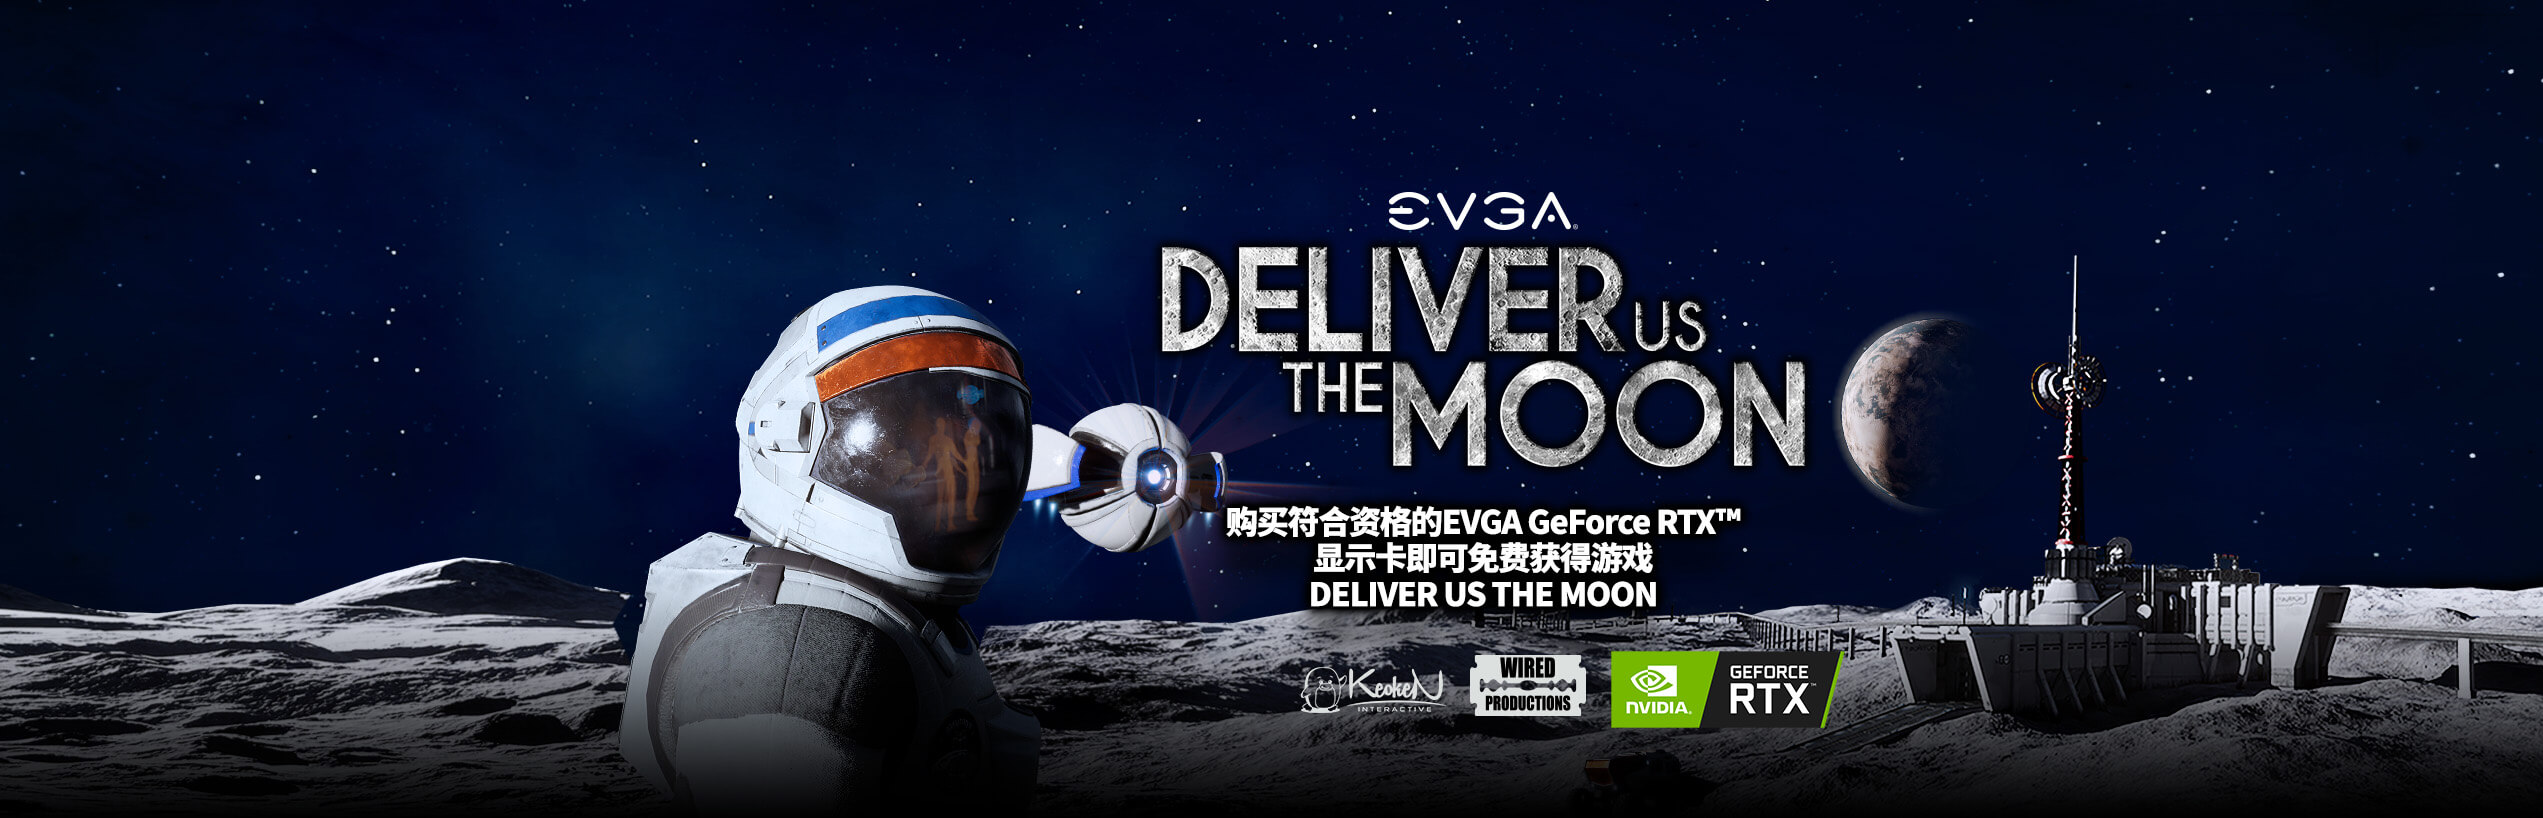 EVGA x DELIVER US THE MOON